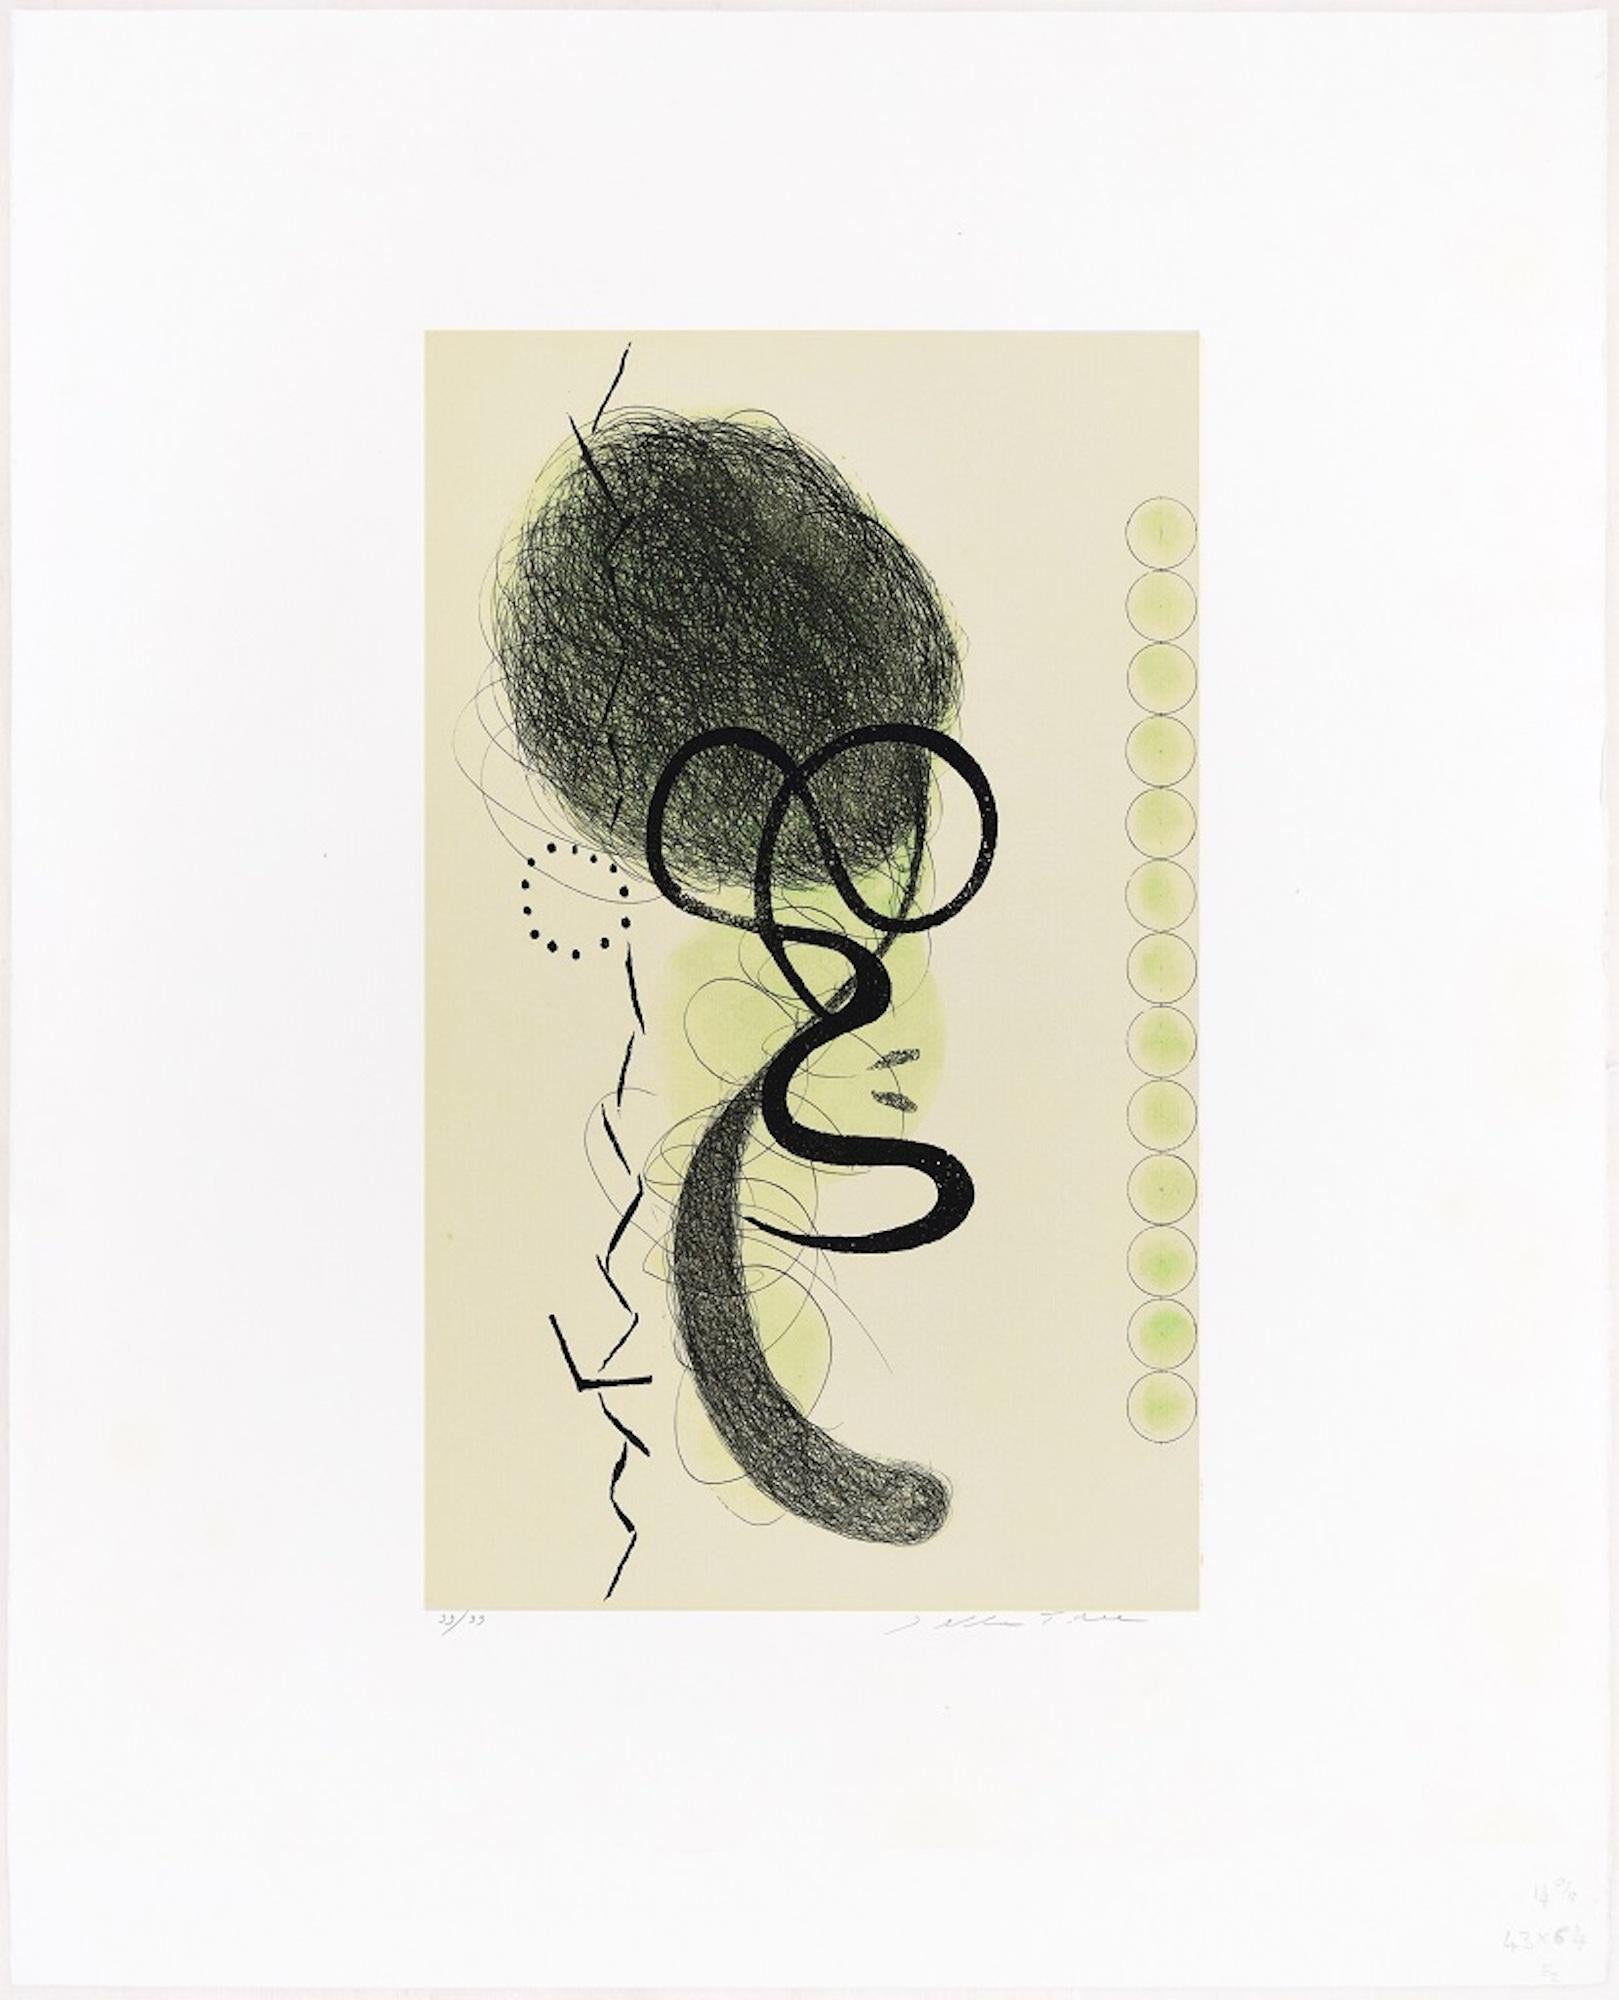 Abstract Movement - Etching by E. Della Torre - 1970s - Print by Enrico Della Torre